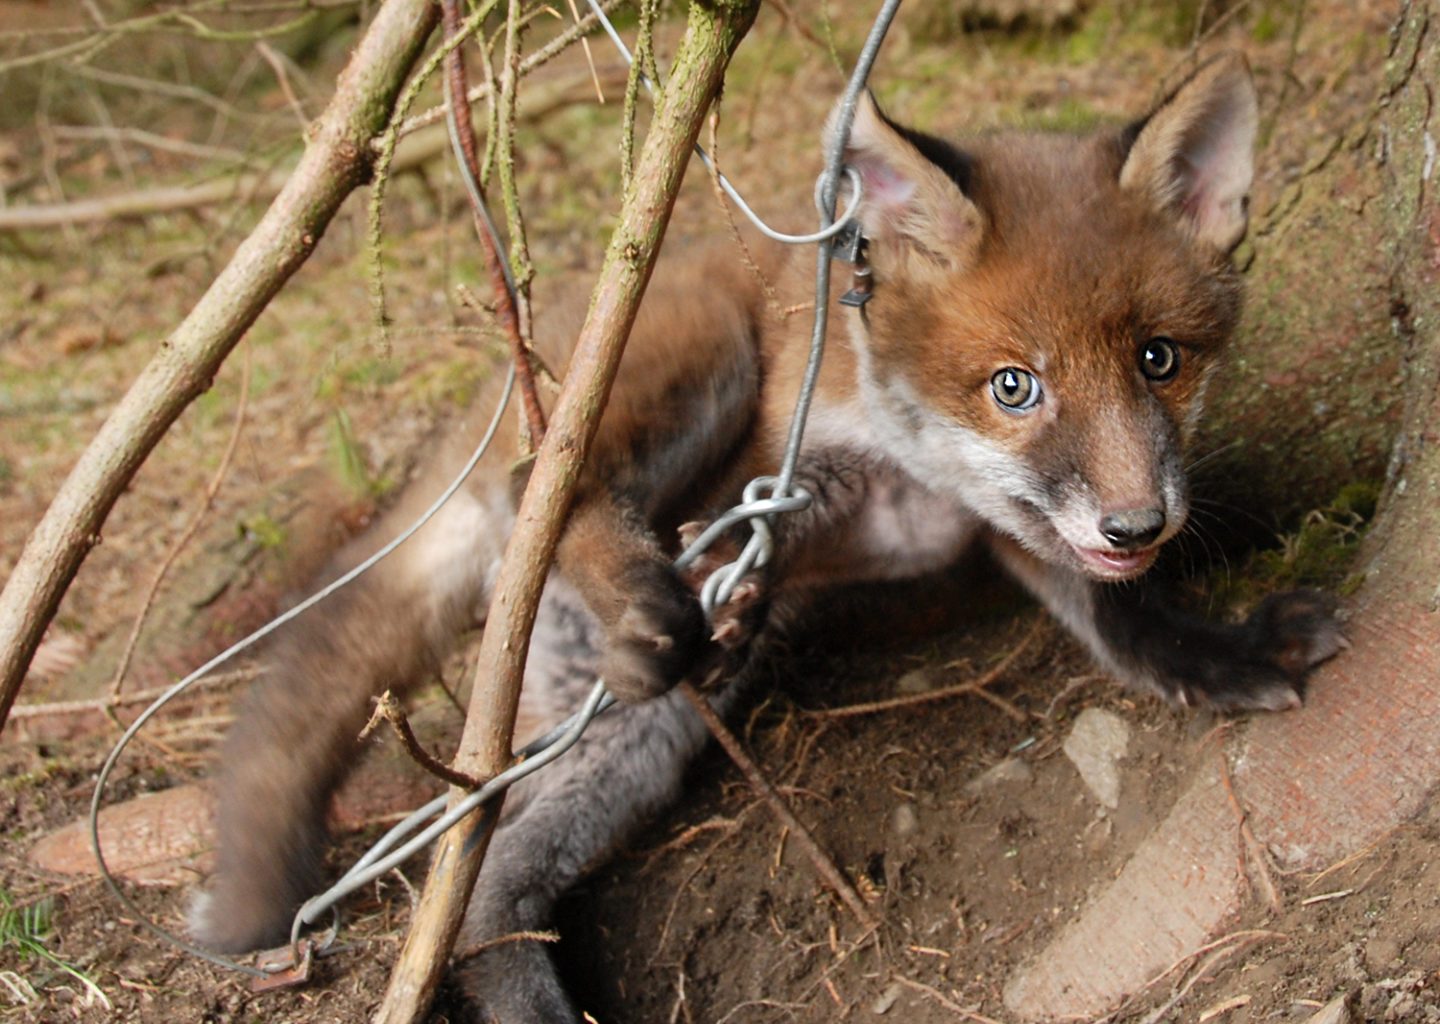 Snare traps killing and injuring pets and protected species, claims report 5